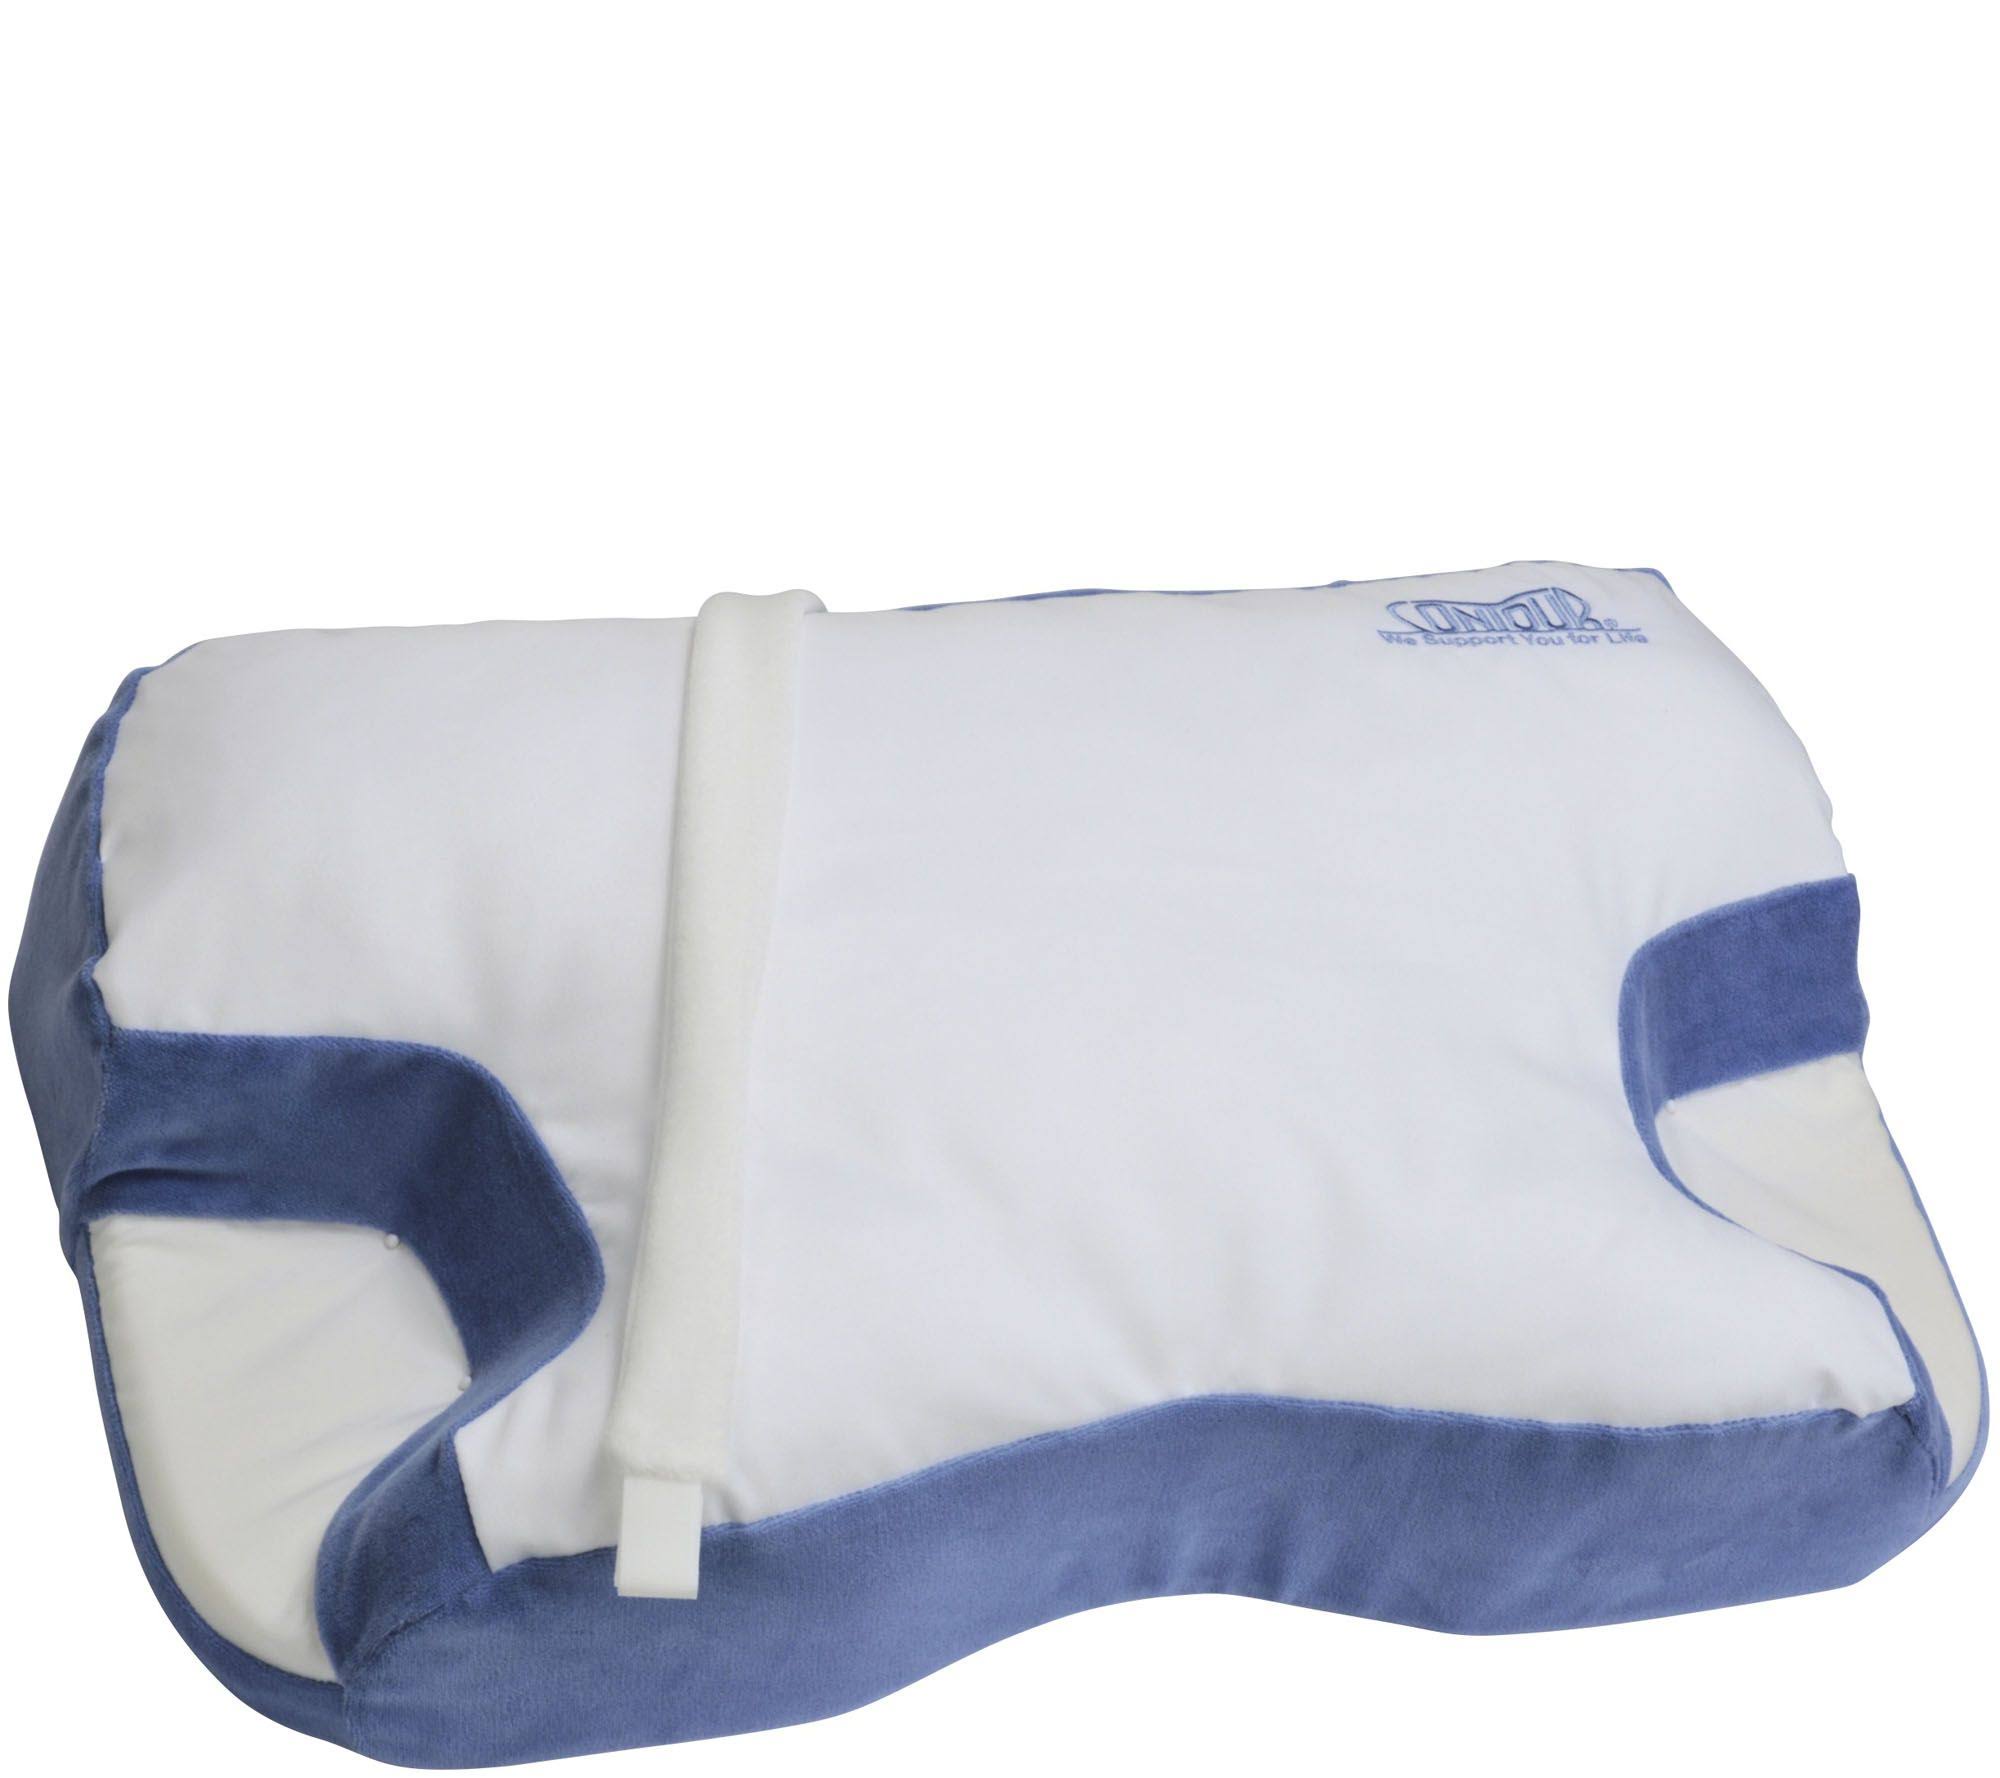 Contour Products CPAP 2.0 Pillow - Blue and White